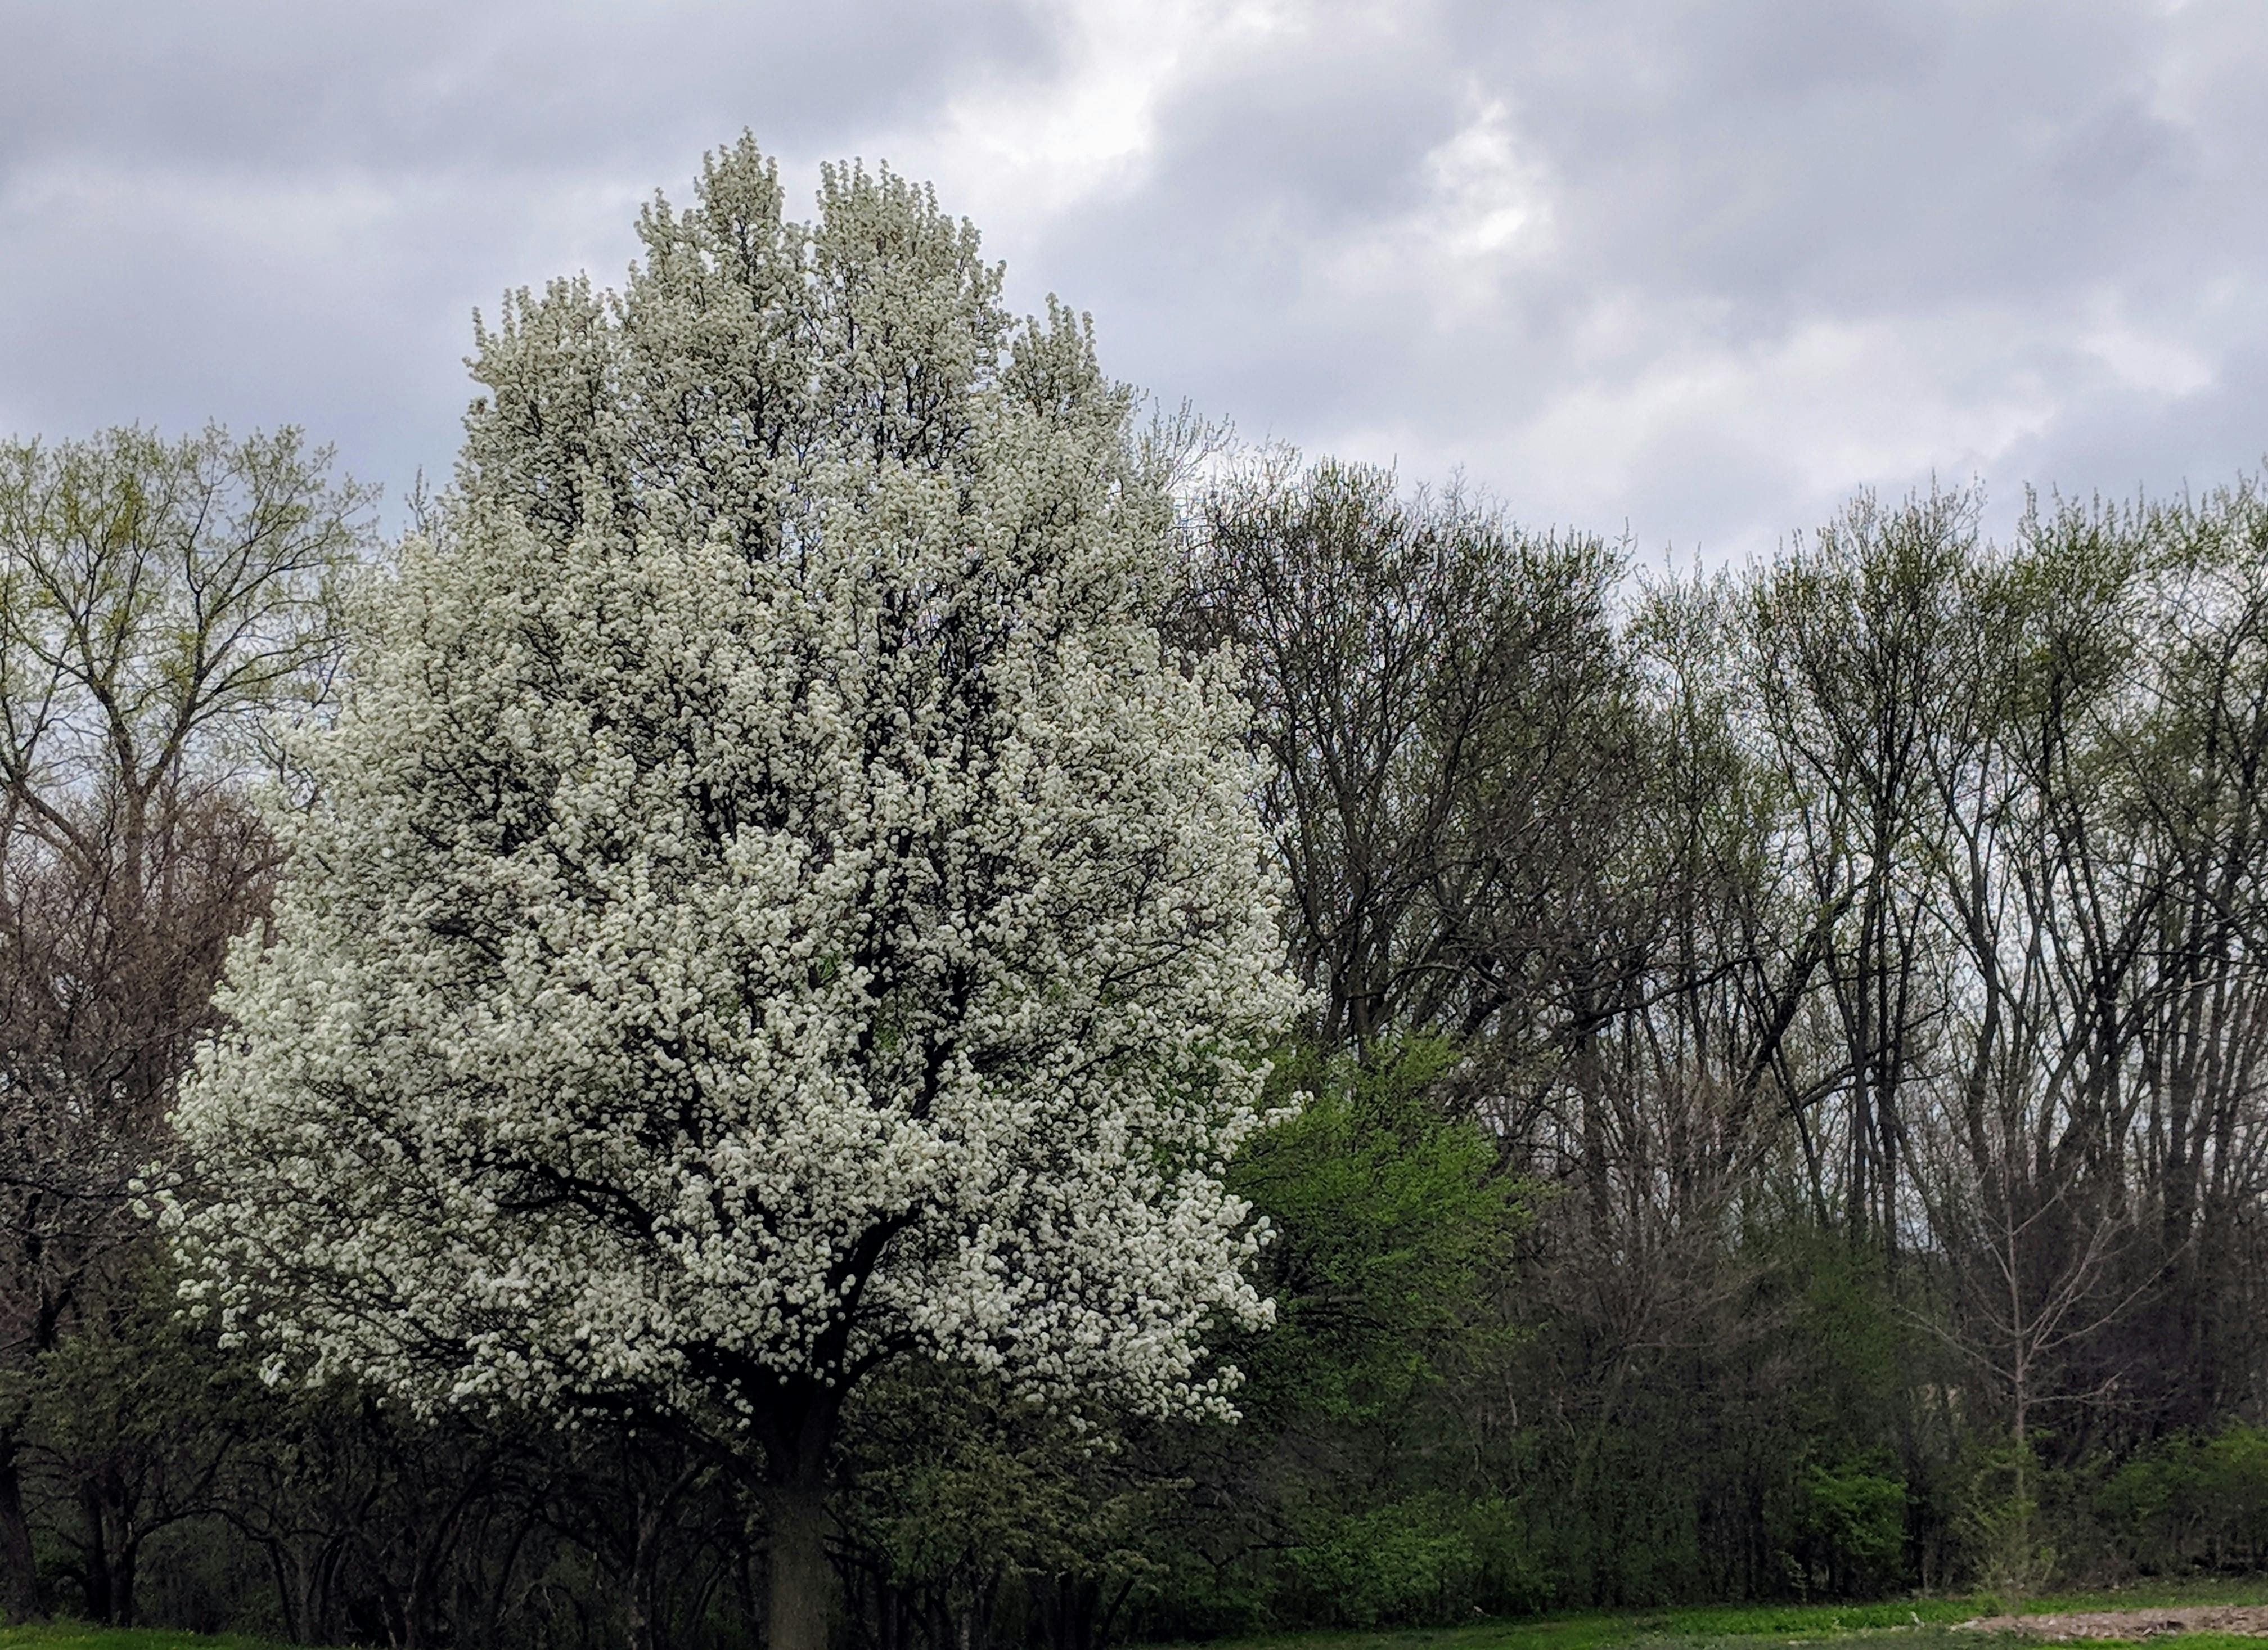 Free stock photo of landscape, pear blossom tree, white flowering tree